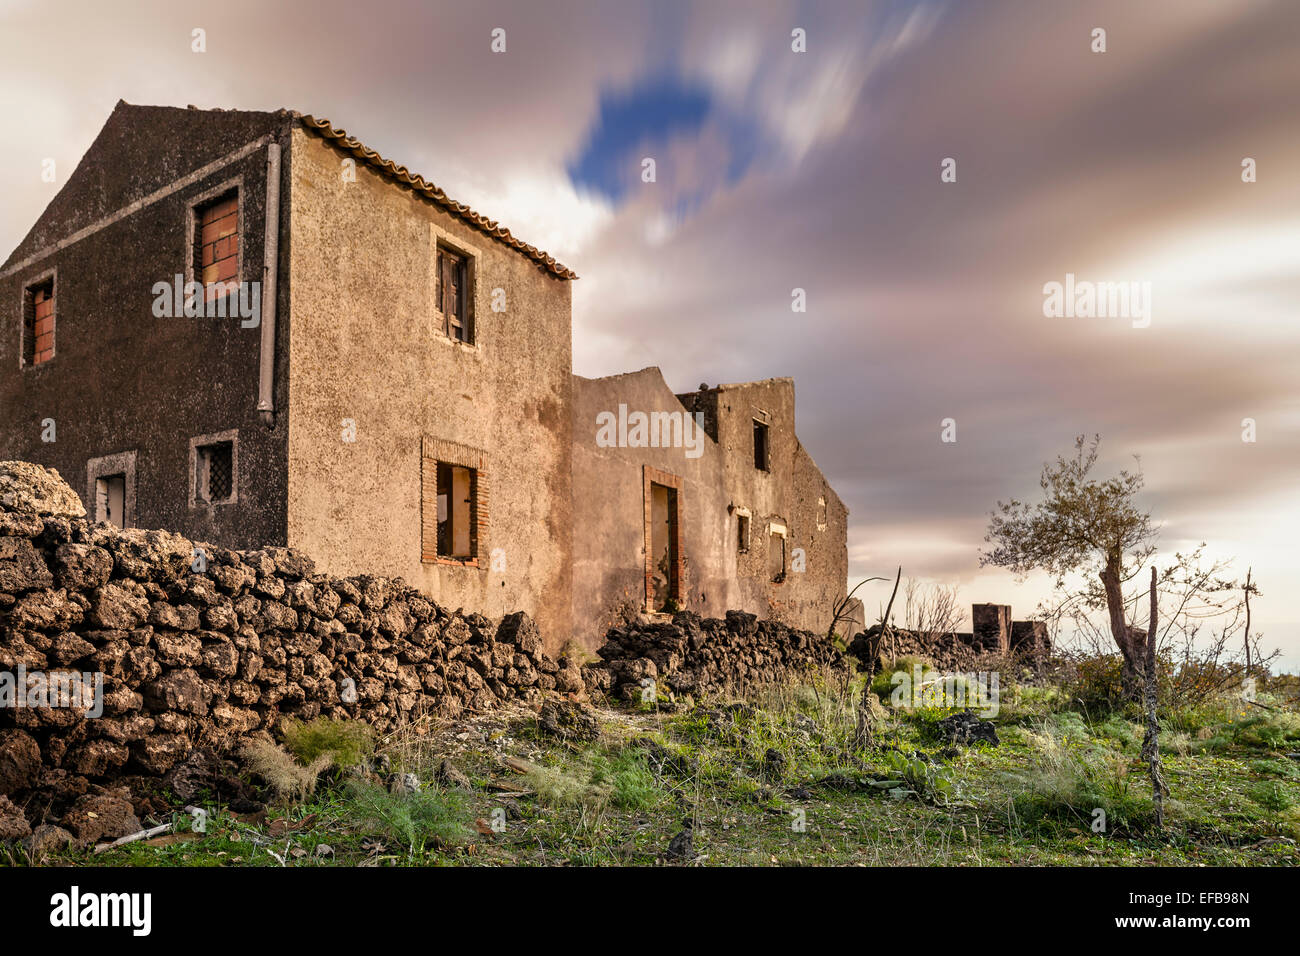 Old countryside building architecture in Catania, Sicily, Italy. Italian Tourism, Travel and Holiday Destination Stock Photo